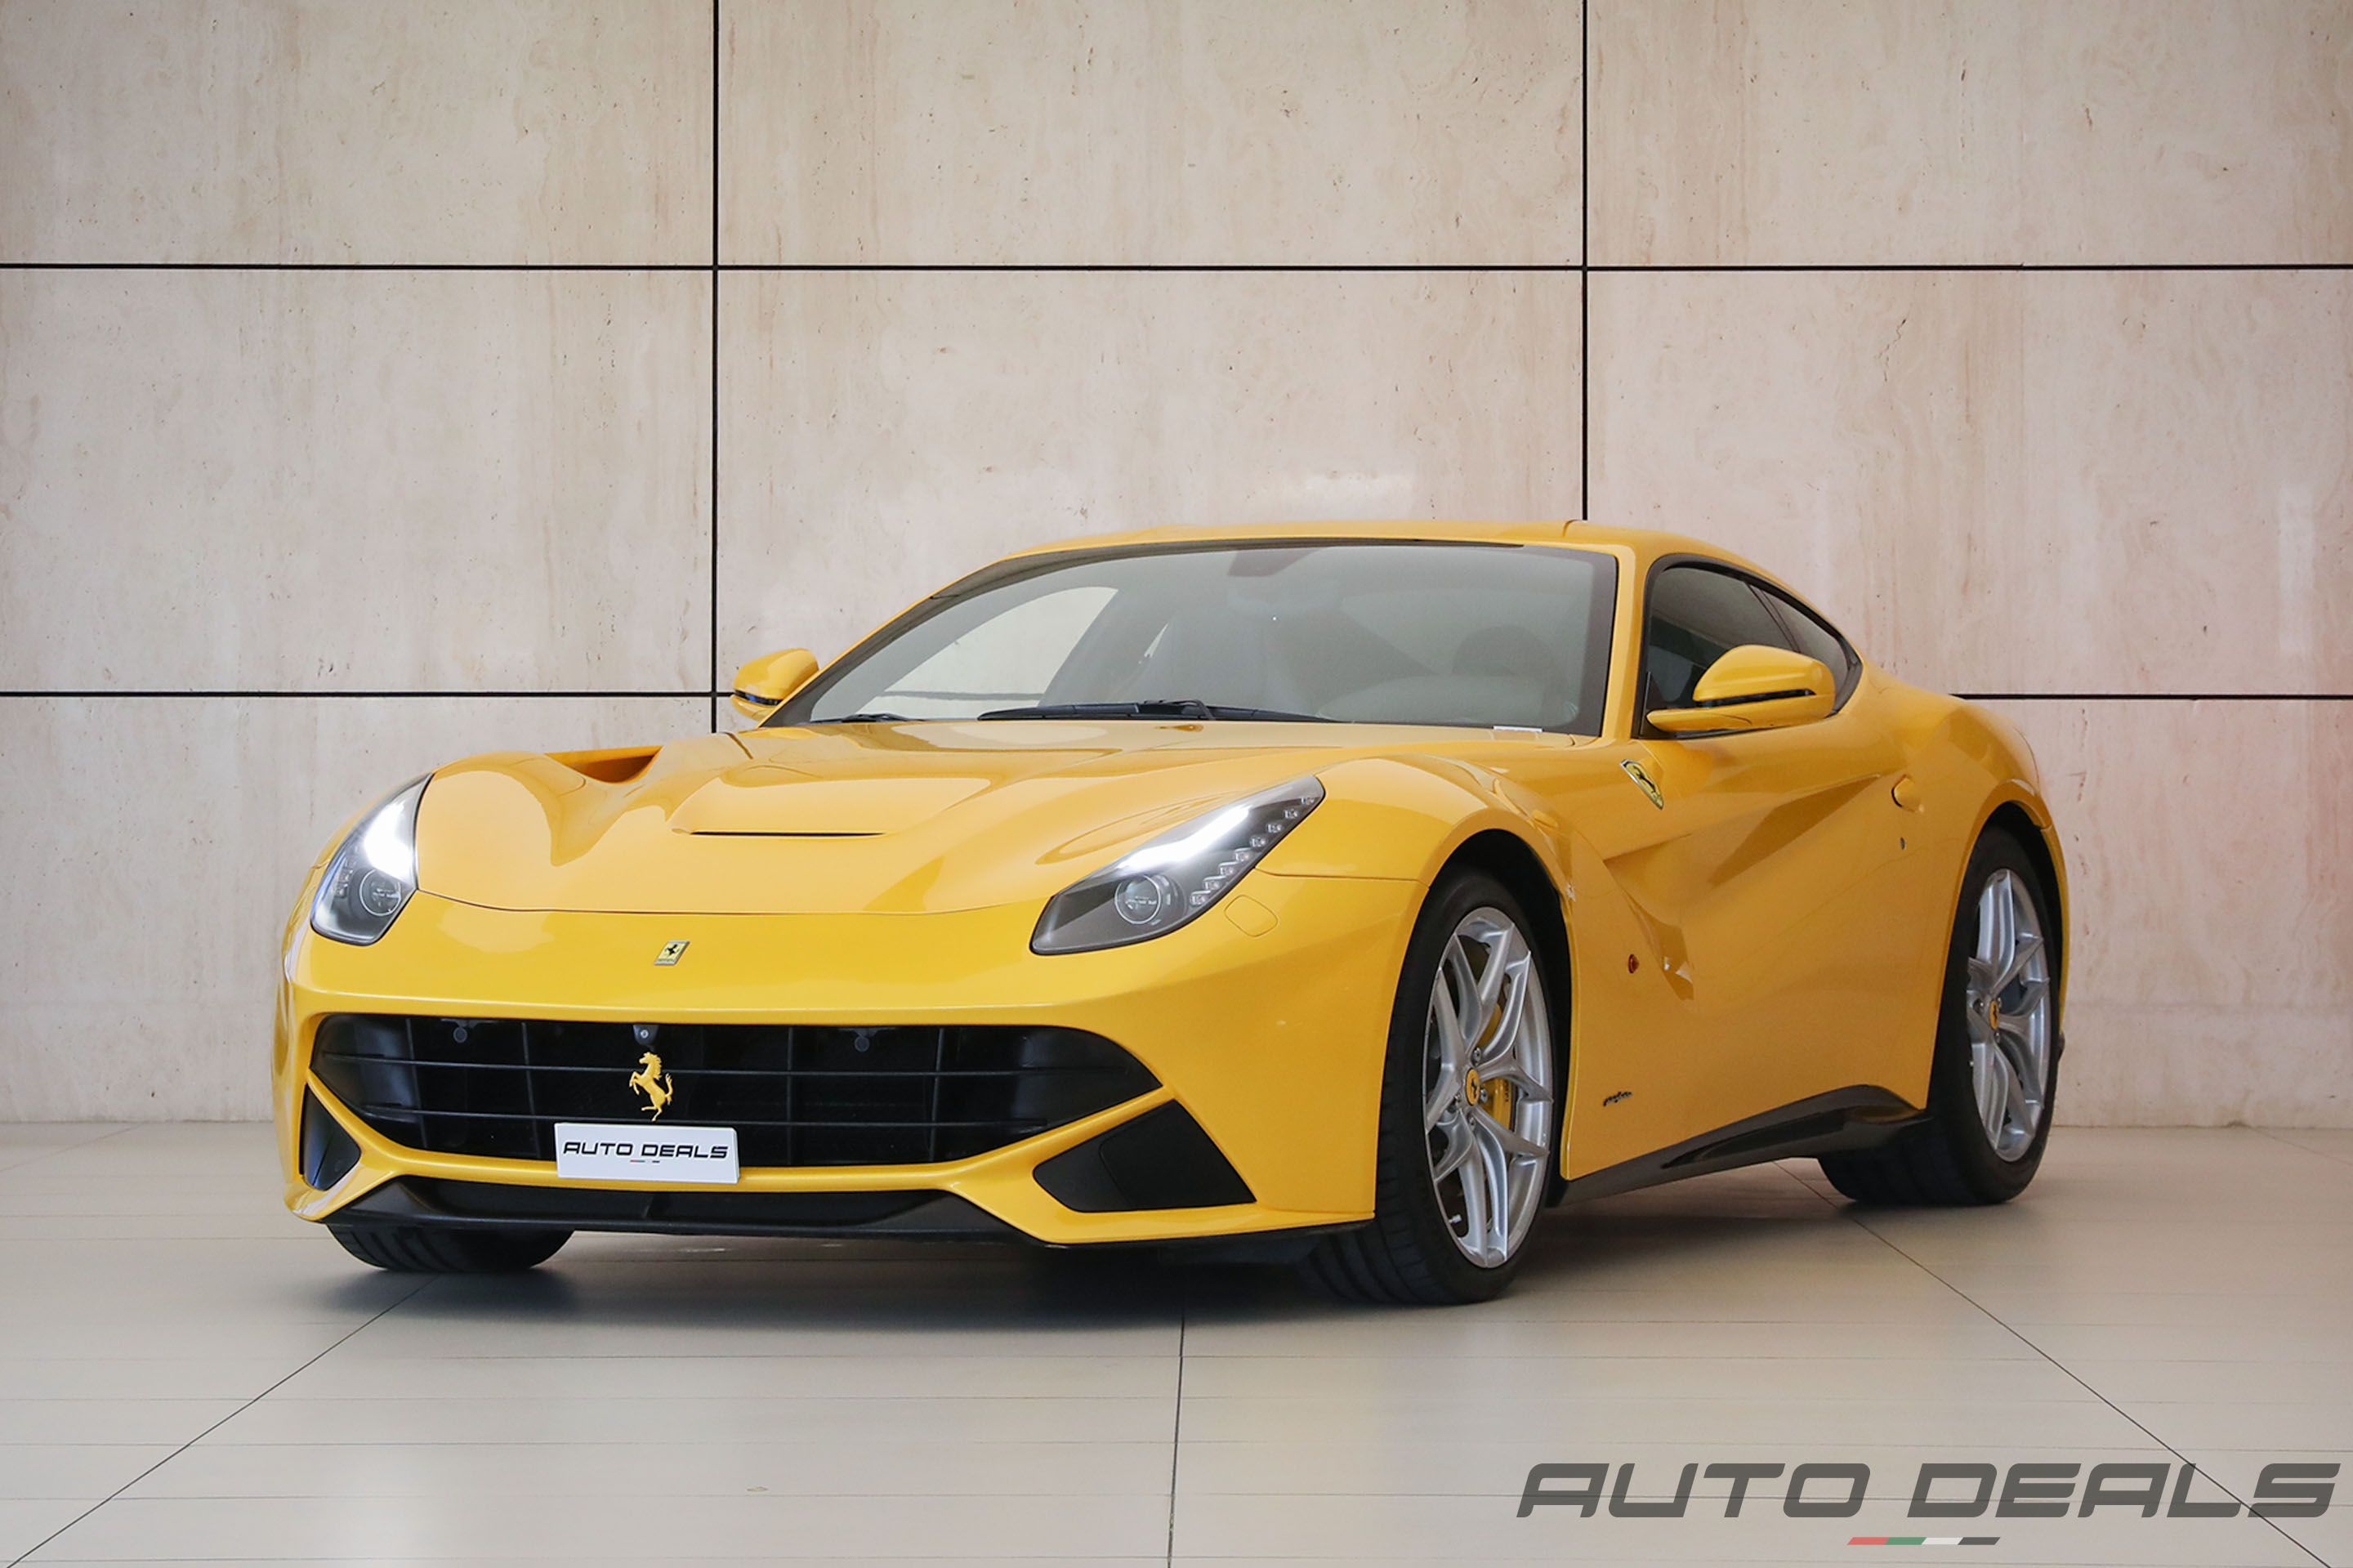 F12 Berlinetta | 2014 - GCC - Premium Quality - Top of the Line - Immaculate Condition | 6.3L V12